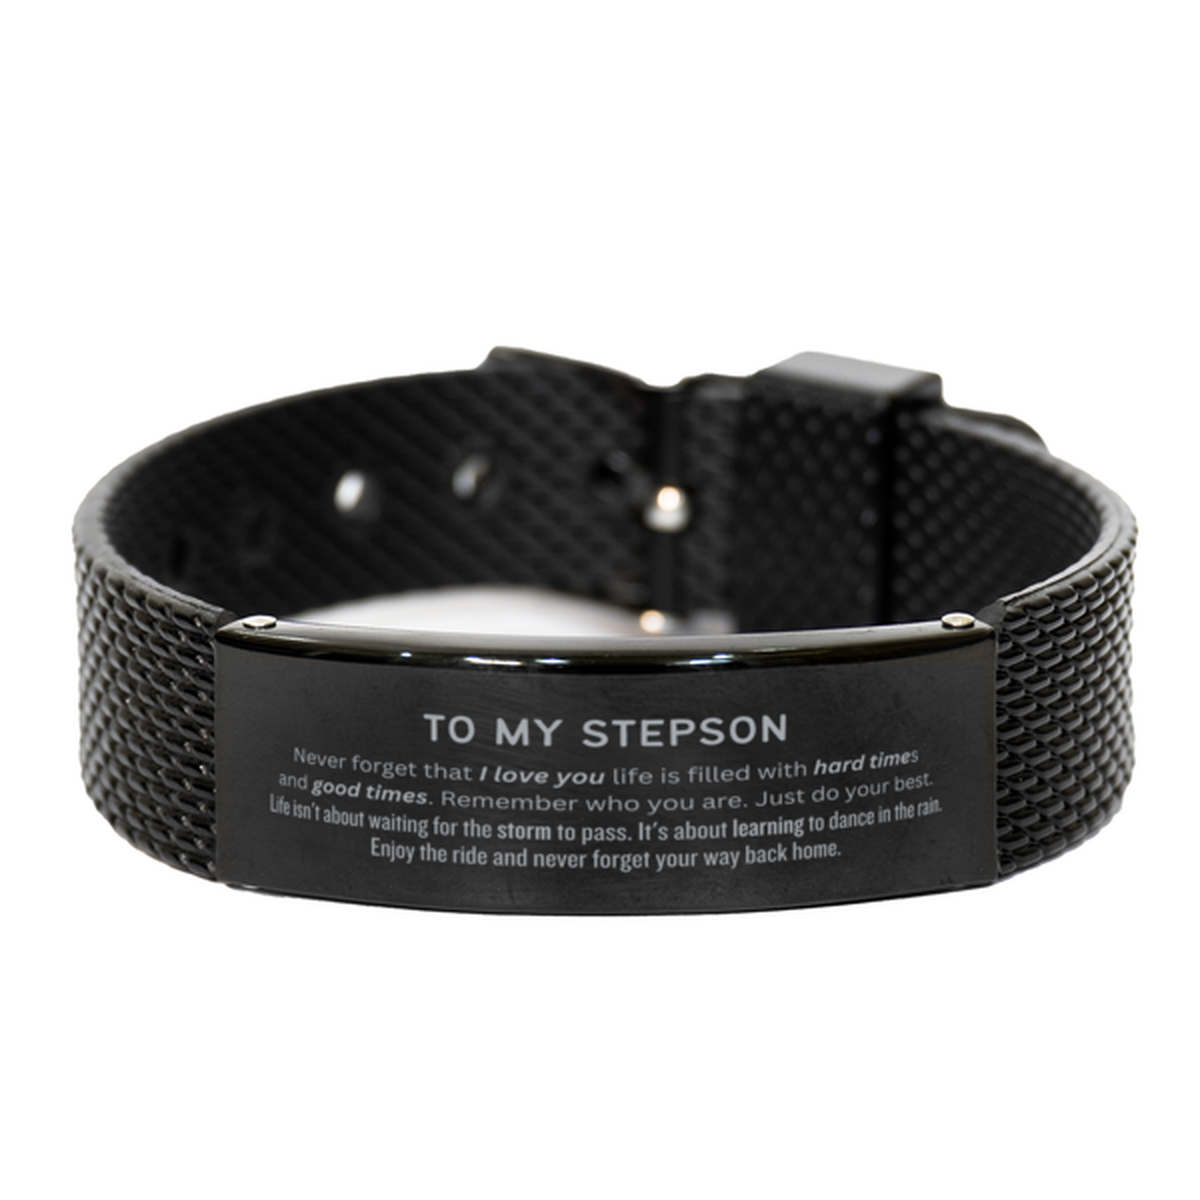 Christmas Stepson Black Shark Mesh Bracelet Gifts, To My Stepson Birthday Thank You Gifts For Stepson, Graduation Unique Gifts For Stepson To My Stepson Never forget that I love you life is filled with hard times and good times. Remember who you are. Just